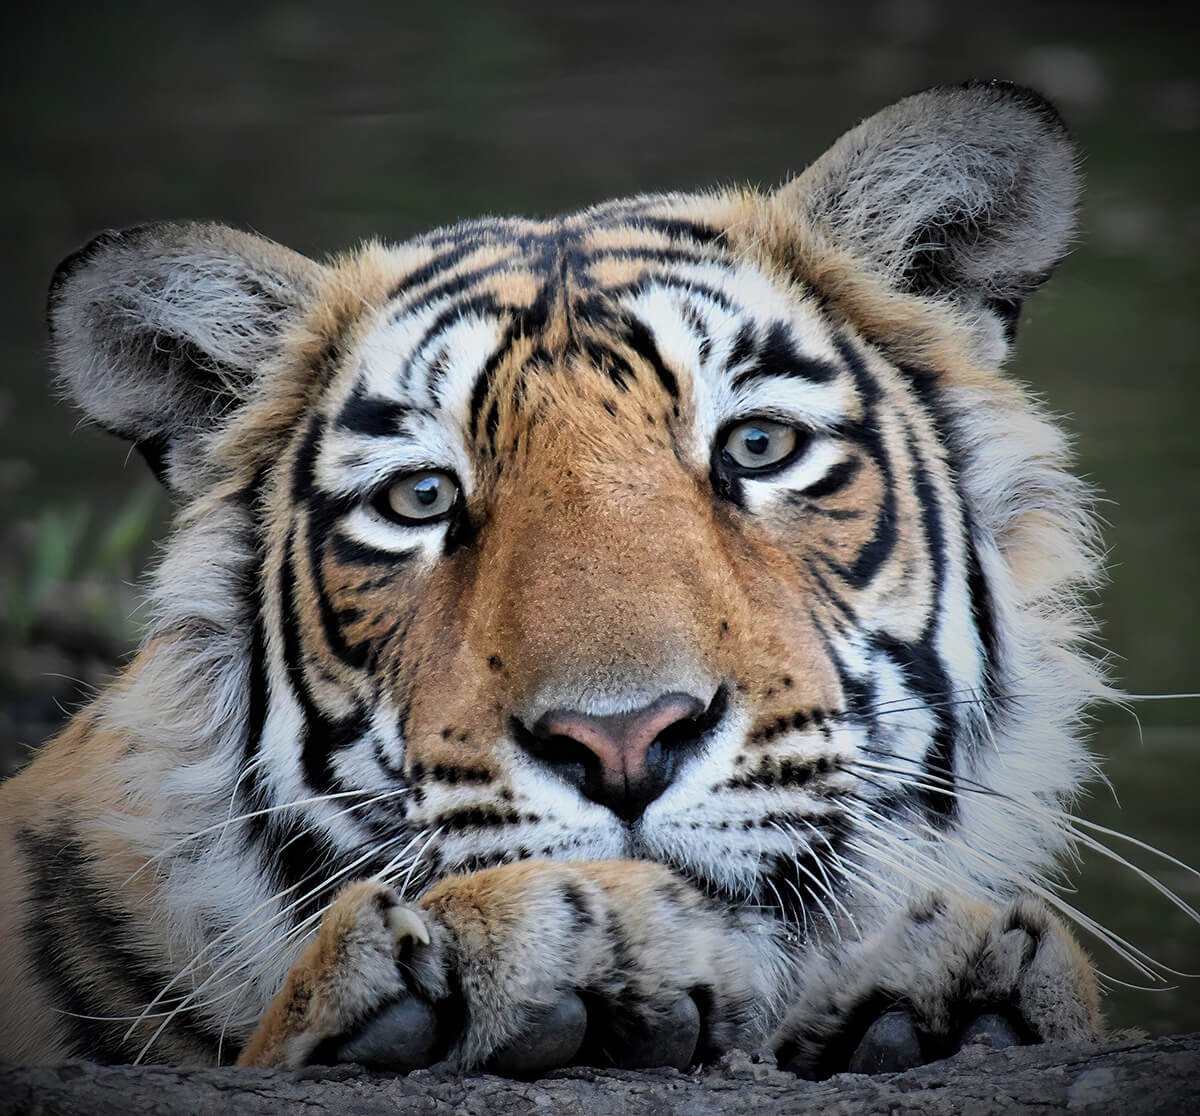 Portrait of a Tiger - India © 2022 Steve Pressman. All Rights Reserved.